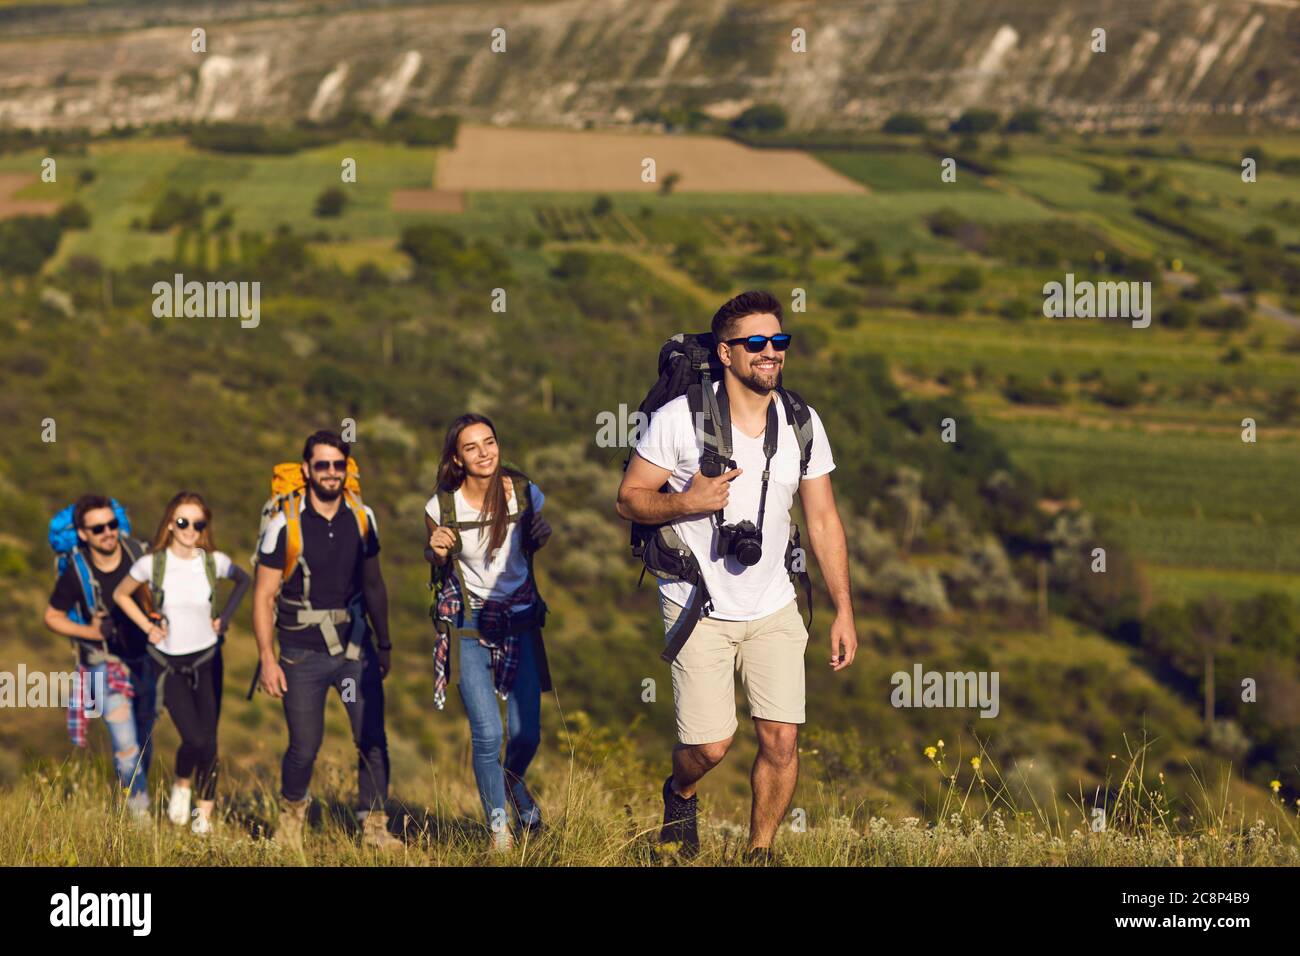 A group of friends with backpacks on a hike in nature. Young people tourists are walking on a hill in the mountains. Stock Photo